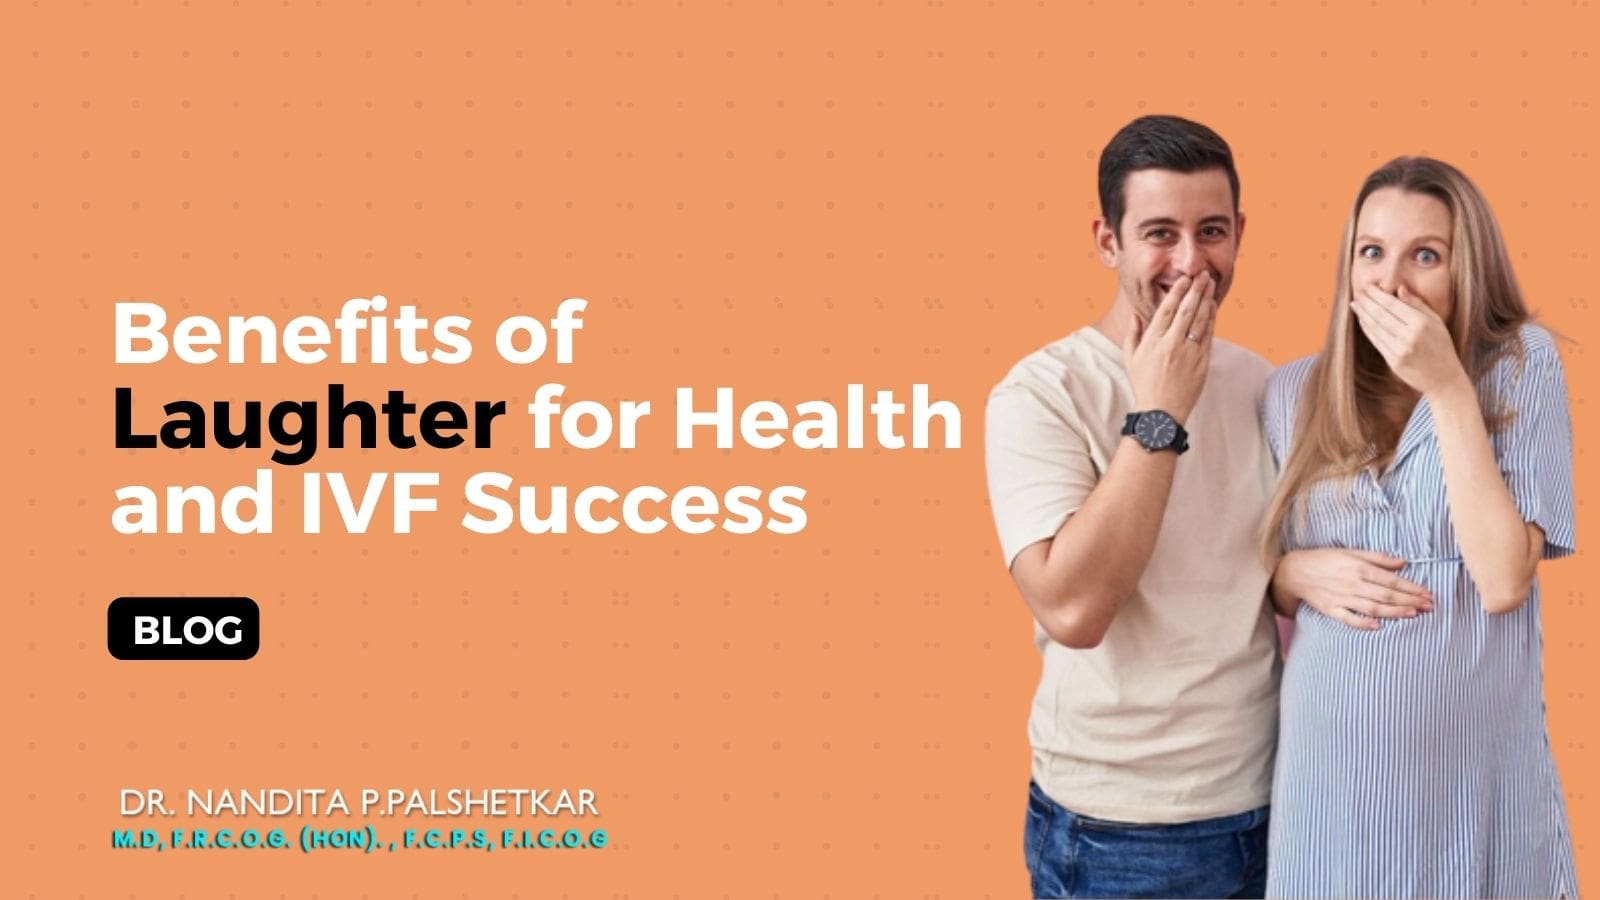 Benefits of Laughter for Health and IVF Success